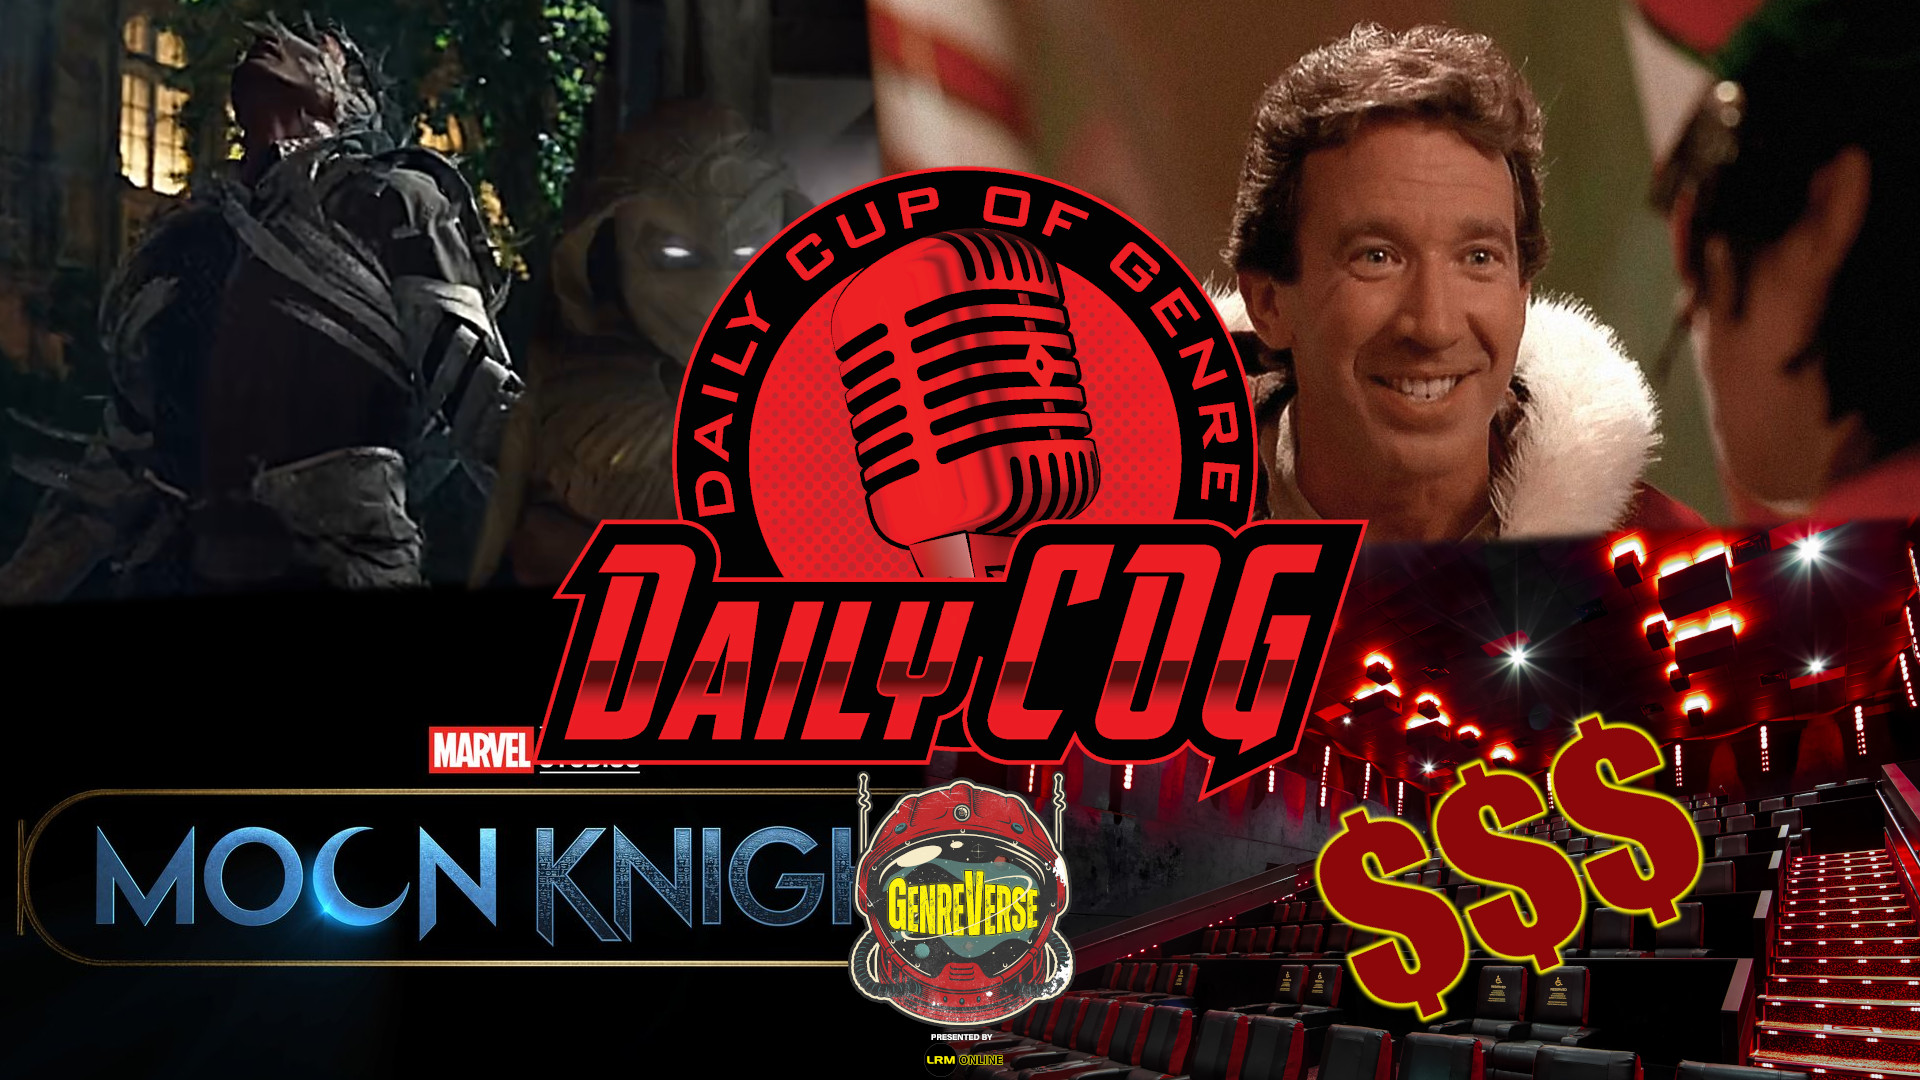 Moon Knight Teaser Reaction. Weekend Box Office Numbers, The Santa Clause Series Daily COG